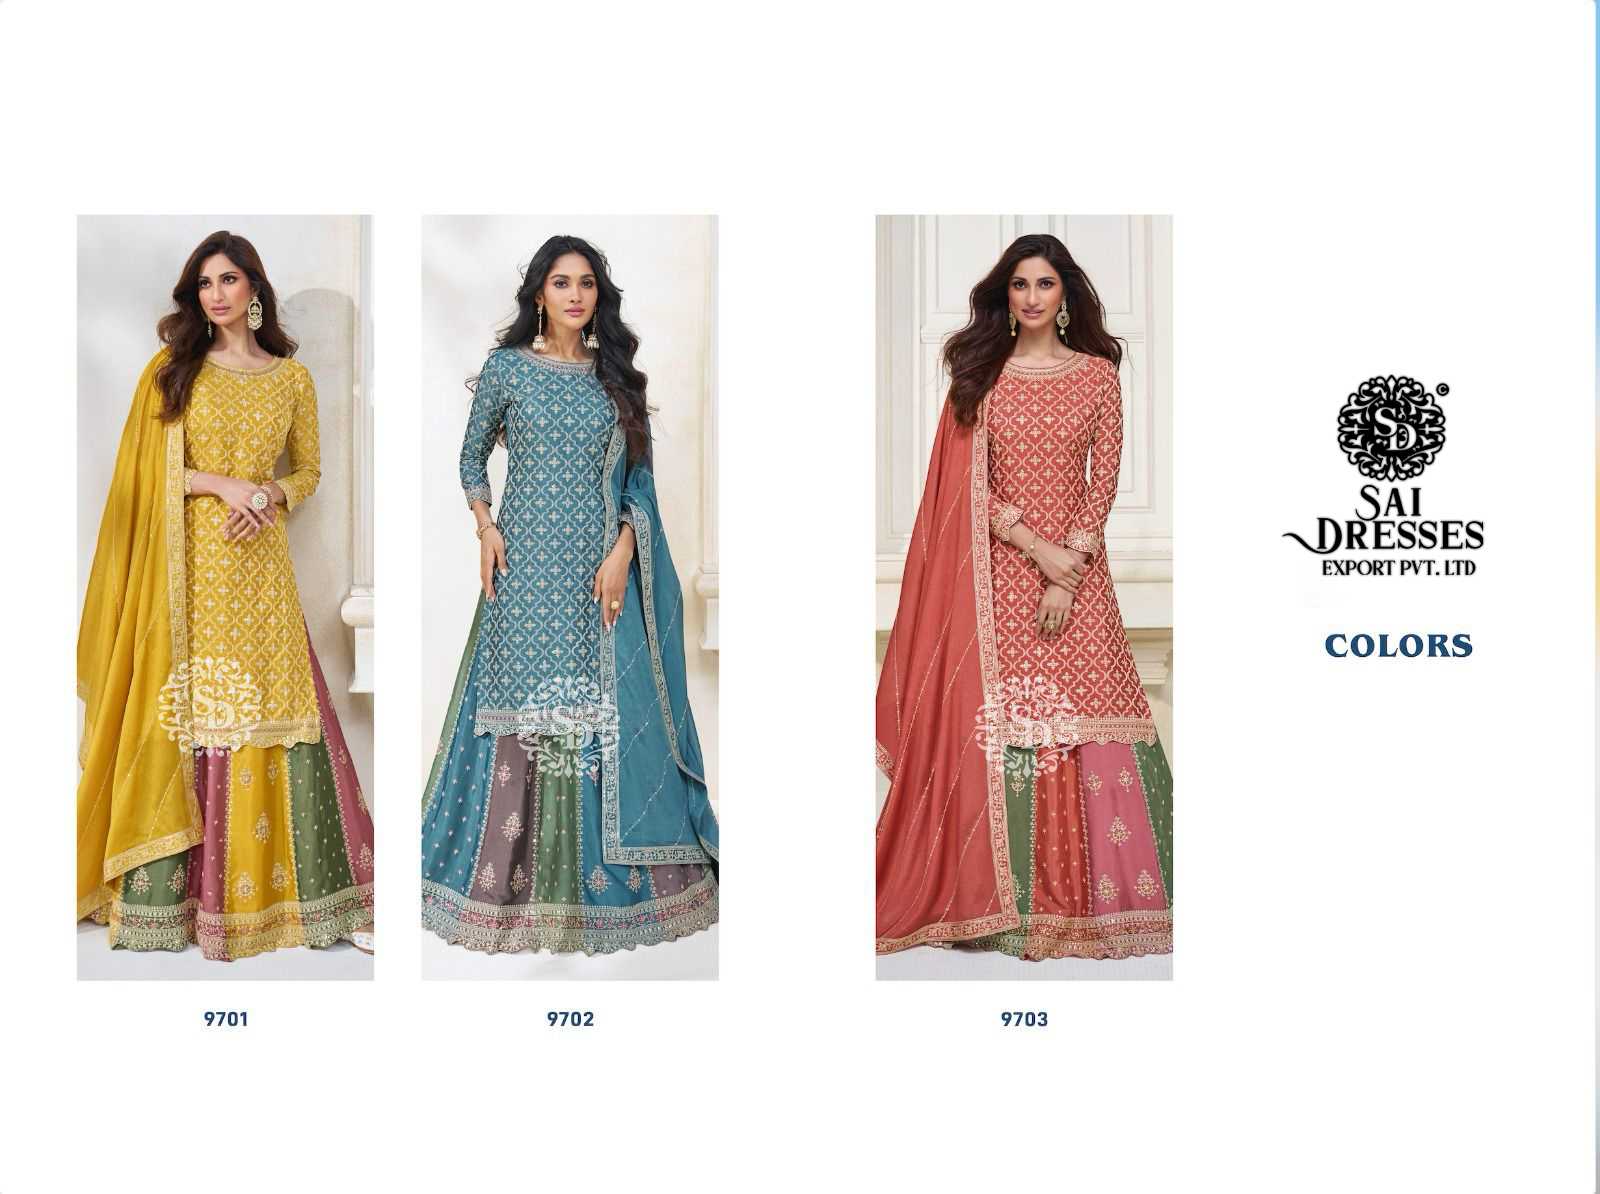 SAI DRESSES PRESENT COLORS  READYMADE EXCLUSIVE FESTIVE WEAR STRAIGHT CUT WITH SKIRT STYLE HEAVY DESIGNER SUITS IN WHOLESALE RATE IN SURAT